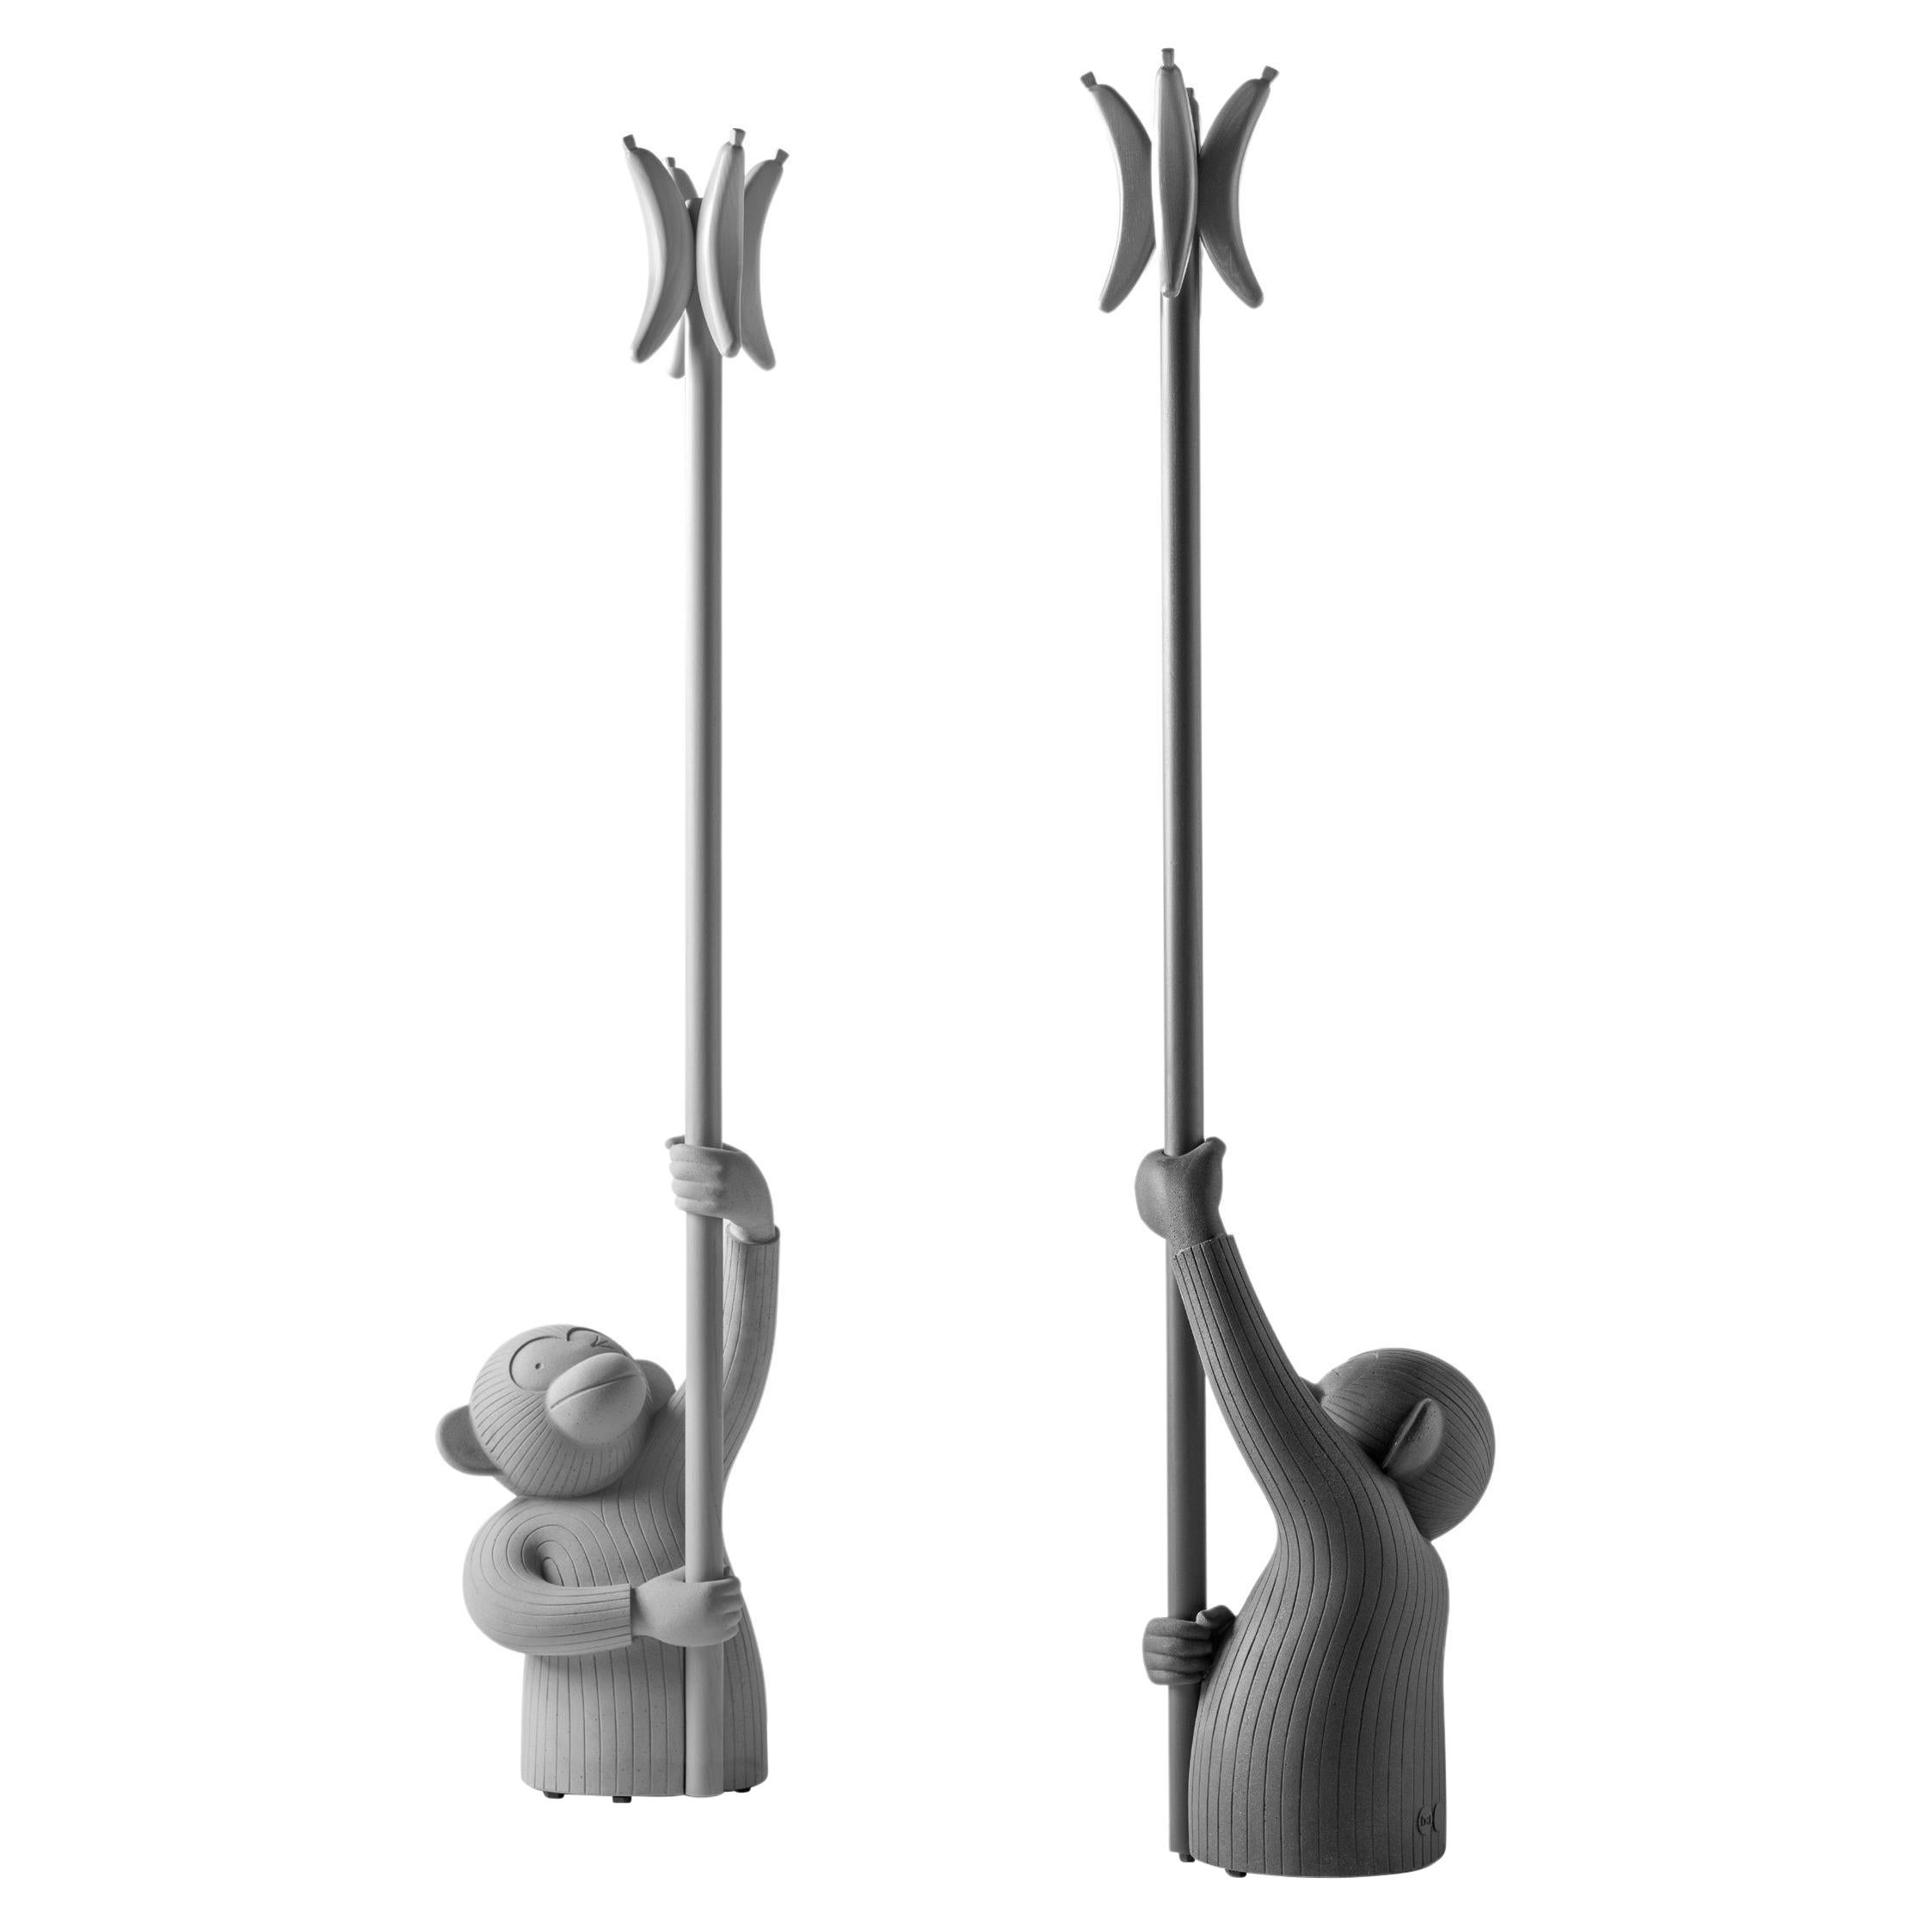 Set of 2 Monkey Coat Stands Black and Grey by Jaime Hayon